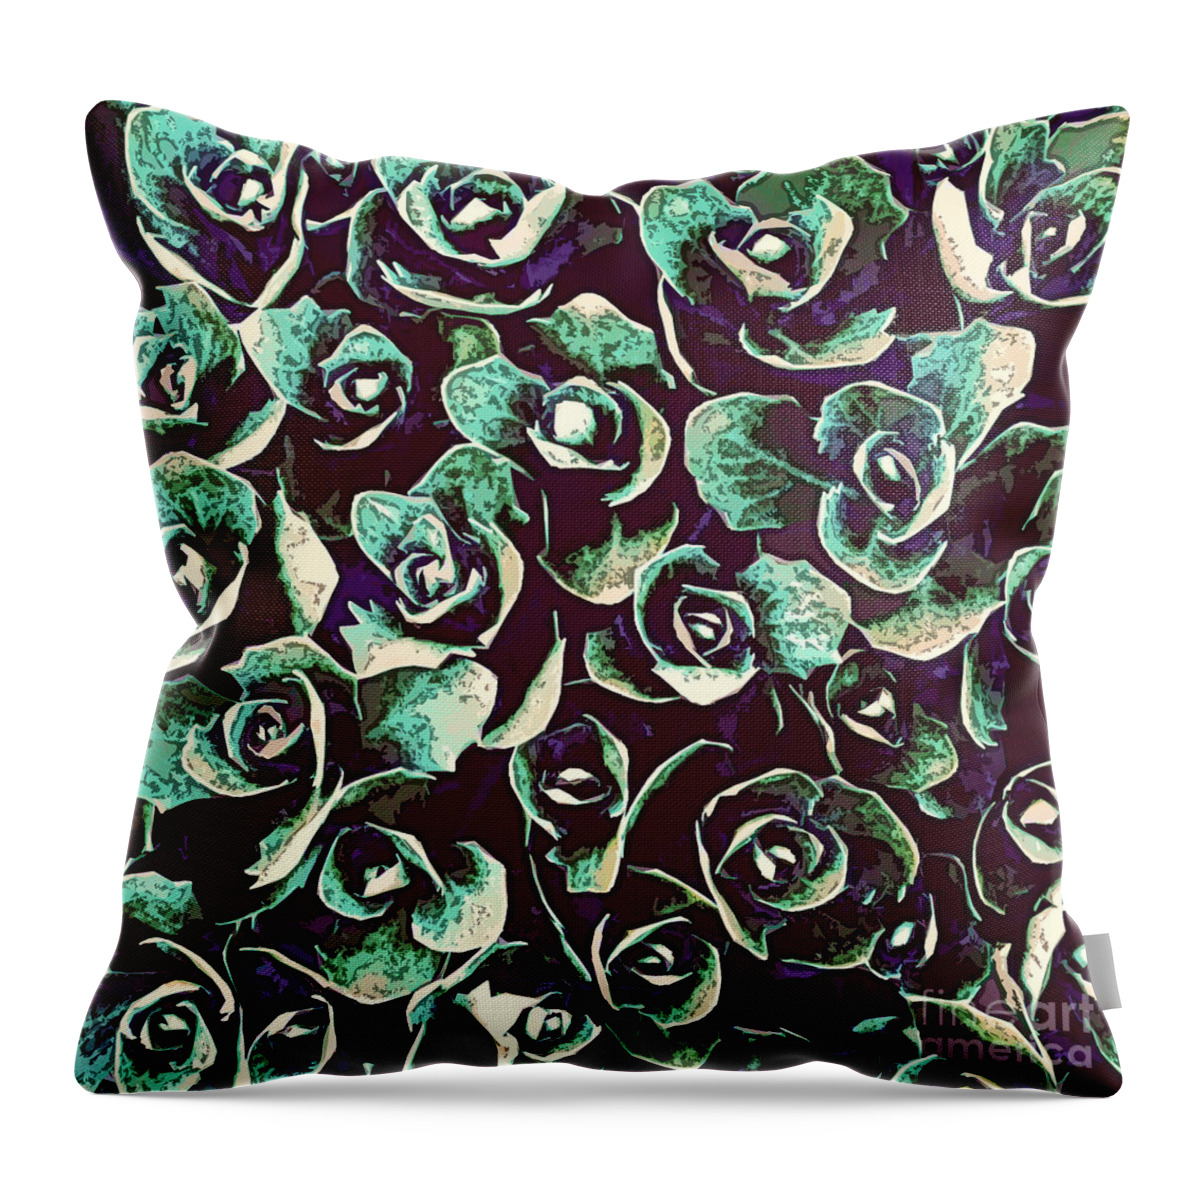 Plants Throw Pillow featuring the digital art Succulent Plant Leaves by Phil Perkins